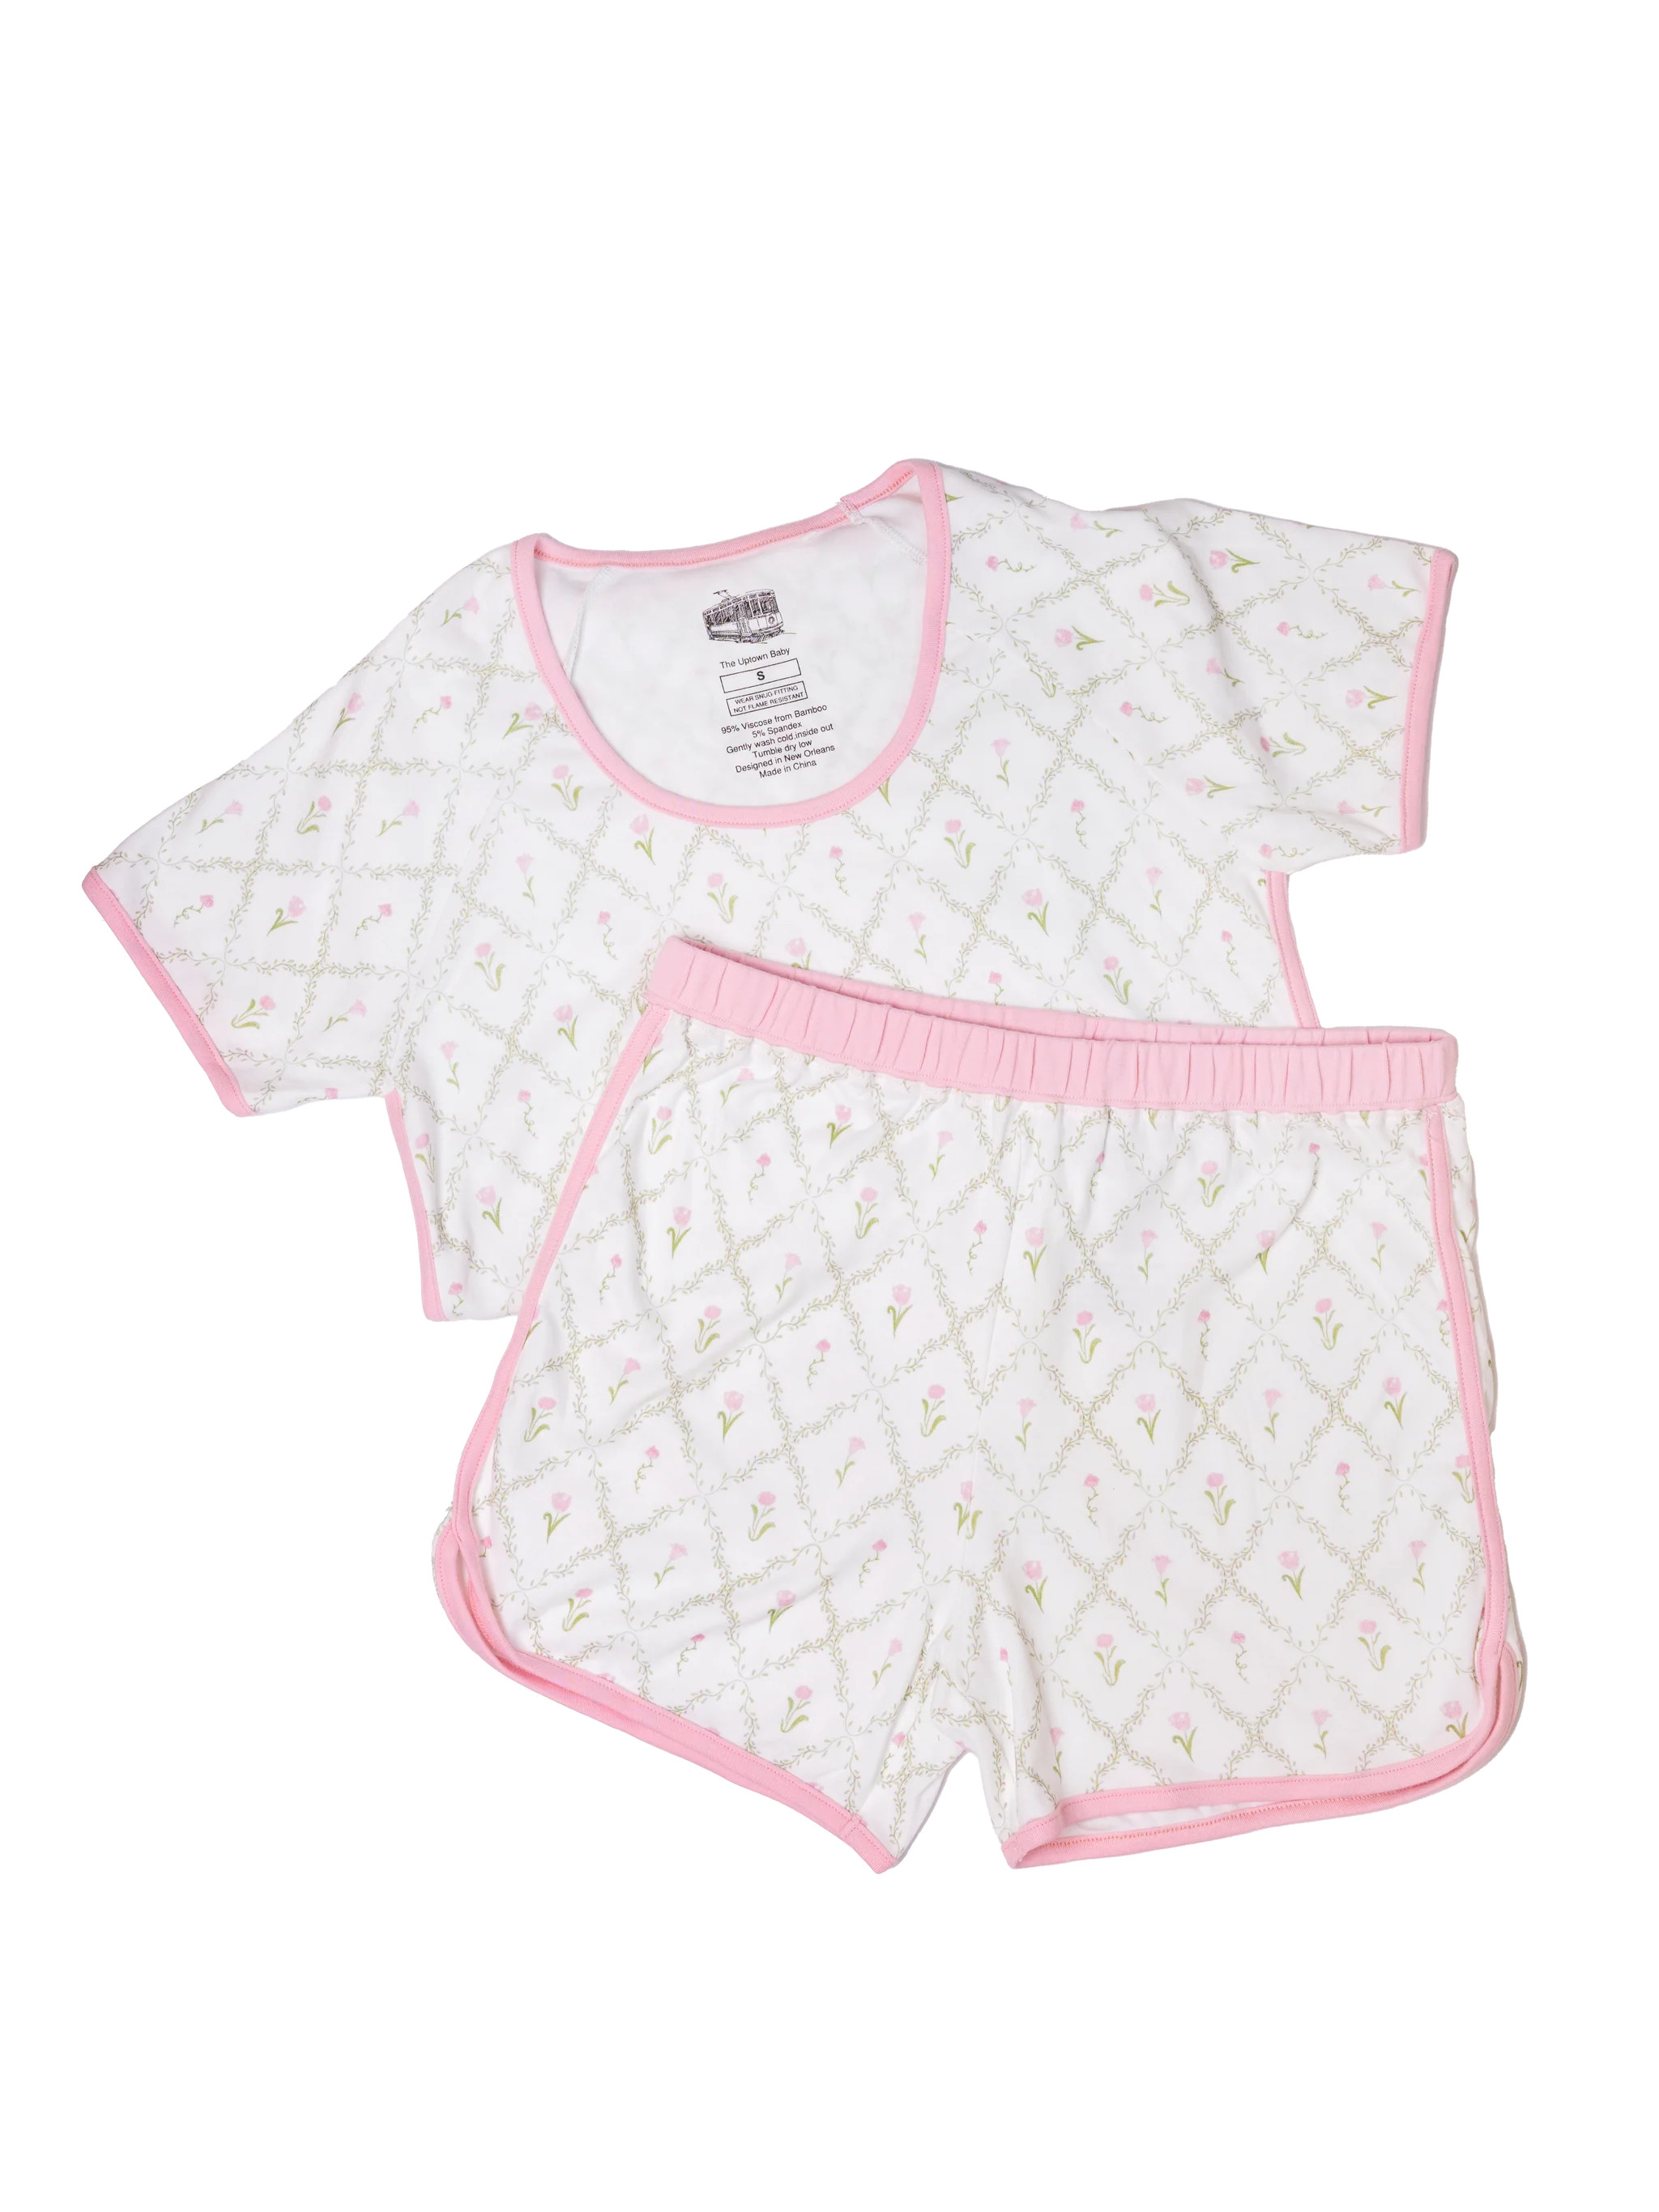 Matching Momma Pjs - Flower Trellis | The Uptown Baby